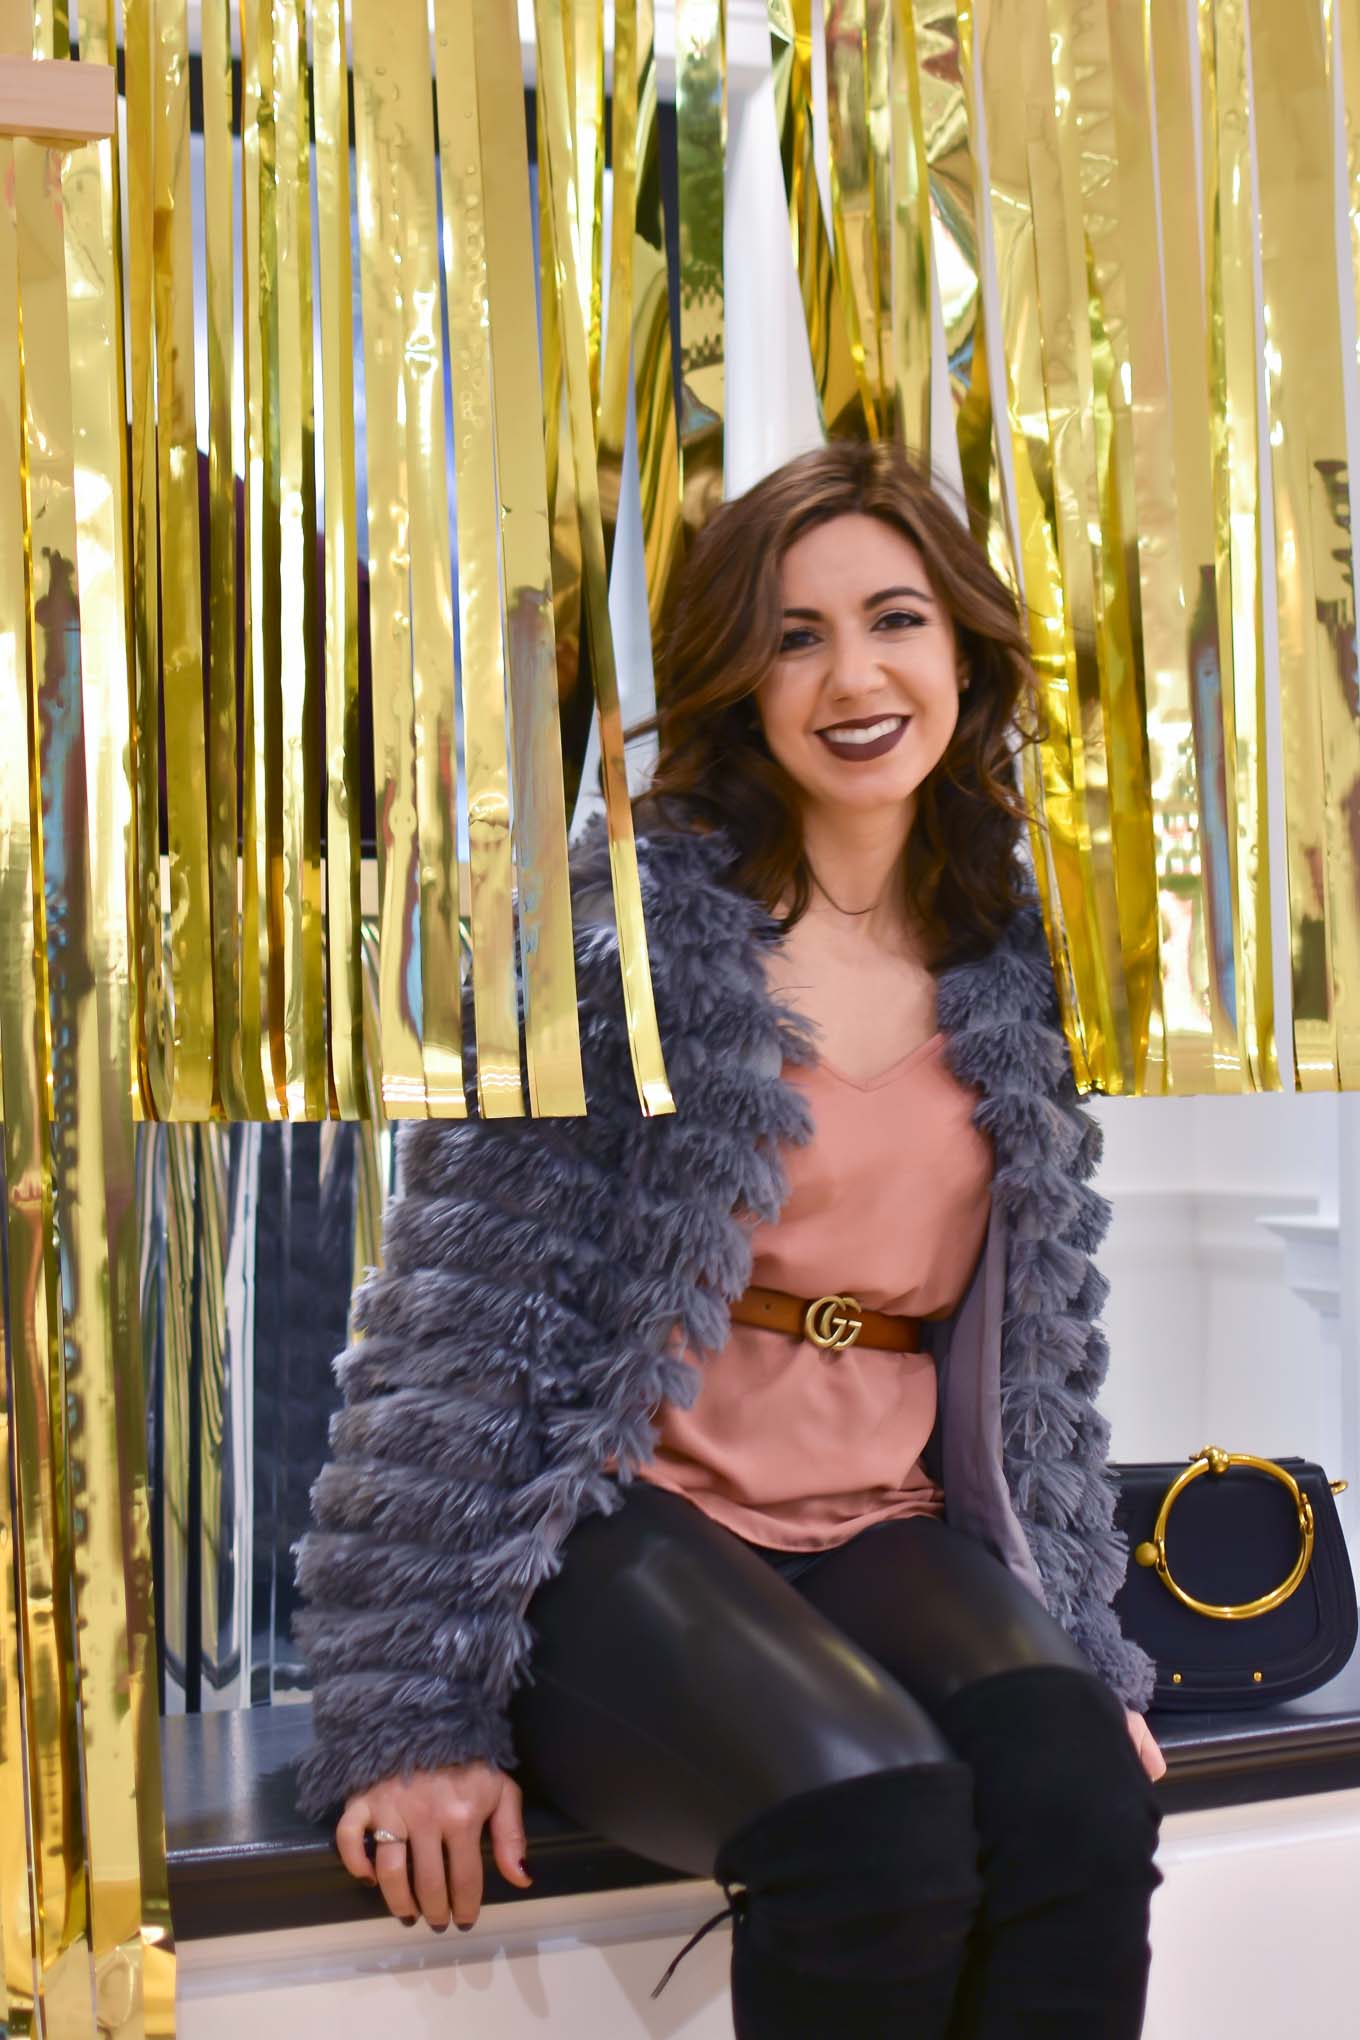 Lifestyle blogger Roxanne of Glass of Glam wearing an Amazon fashion faux fur jacket, faux leather leggings, Chloe Nile bag, otk boots, and Gerard Cosmetics lipstick - Faux Leather leggings by popular Chicago fashion blogger Glass of Glam